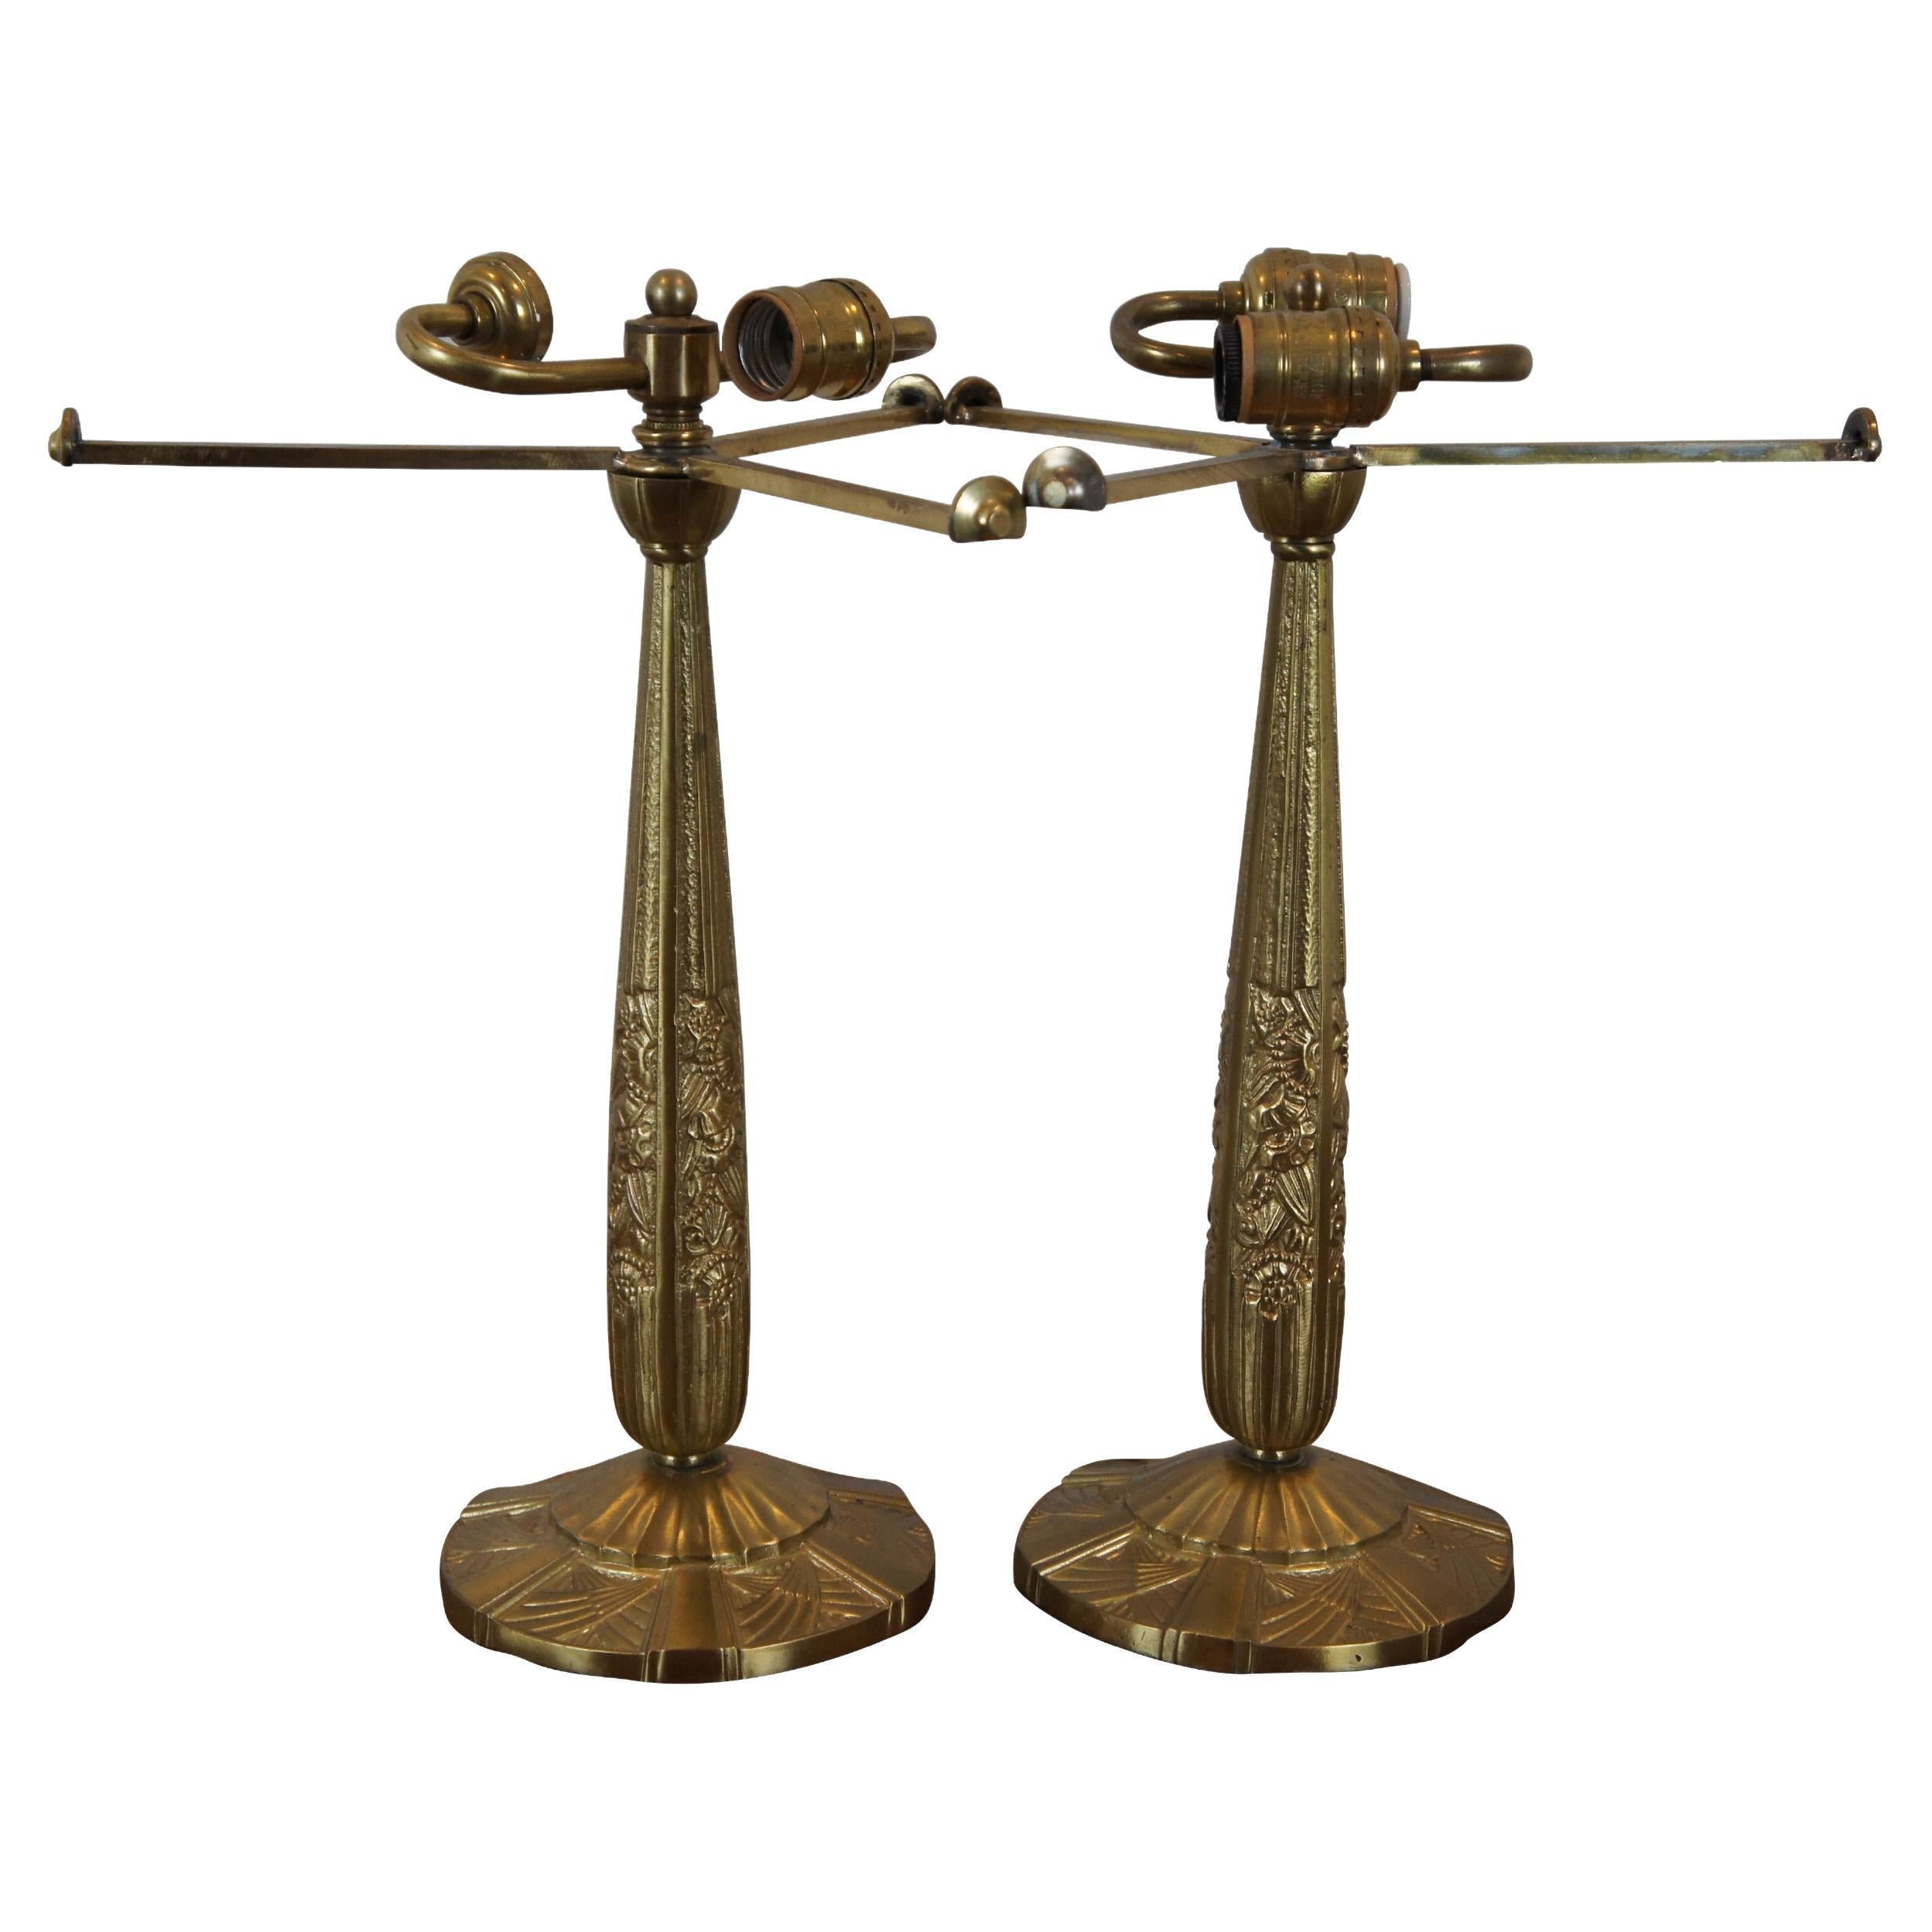 2 Antique French Art Deco Heavy Bronze 2 Light Library Table Lamp Bases For Sale